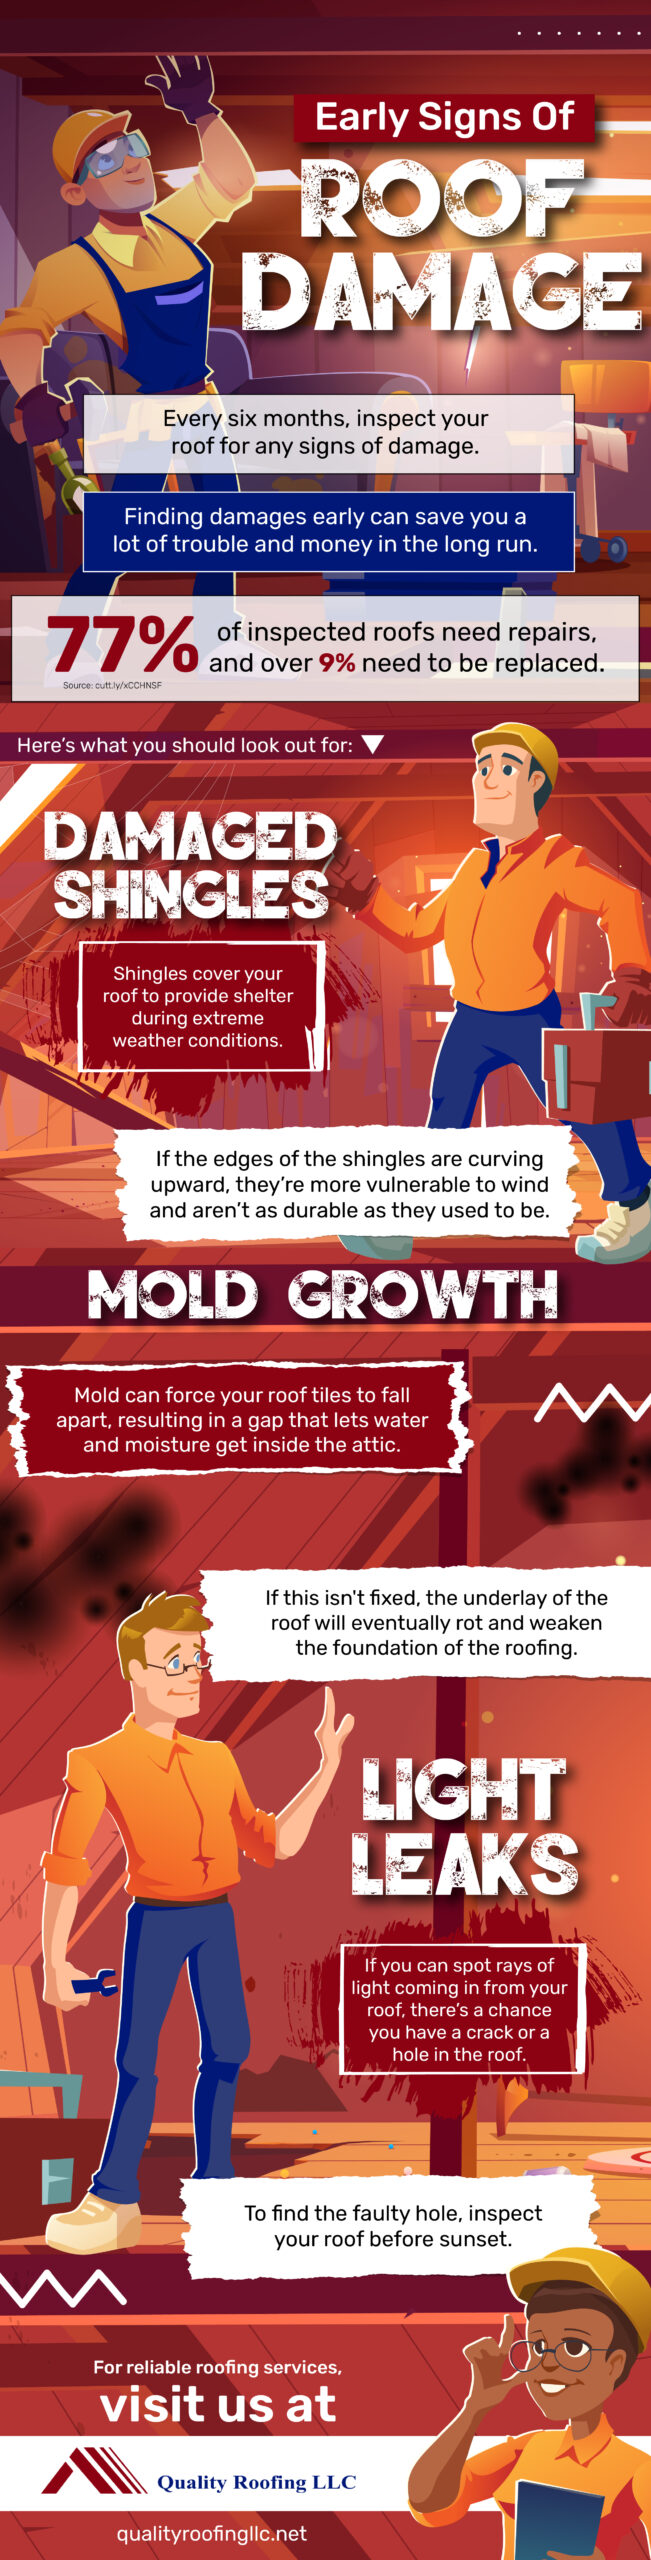 Early Signs of Roof Damage - Infograph